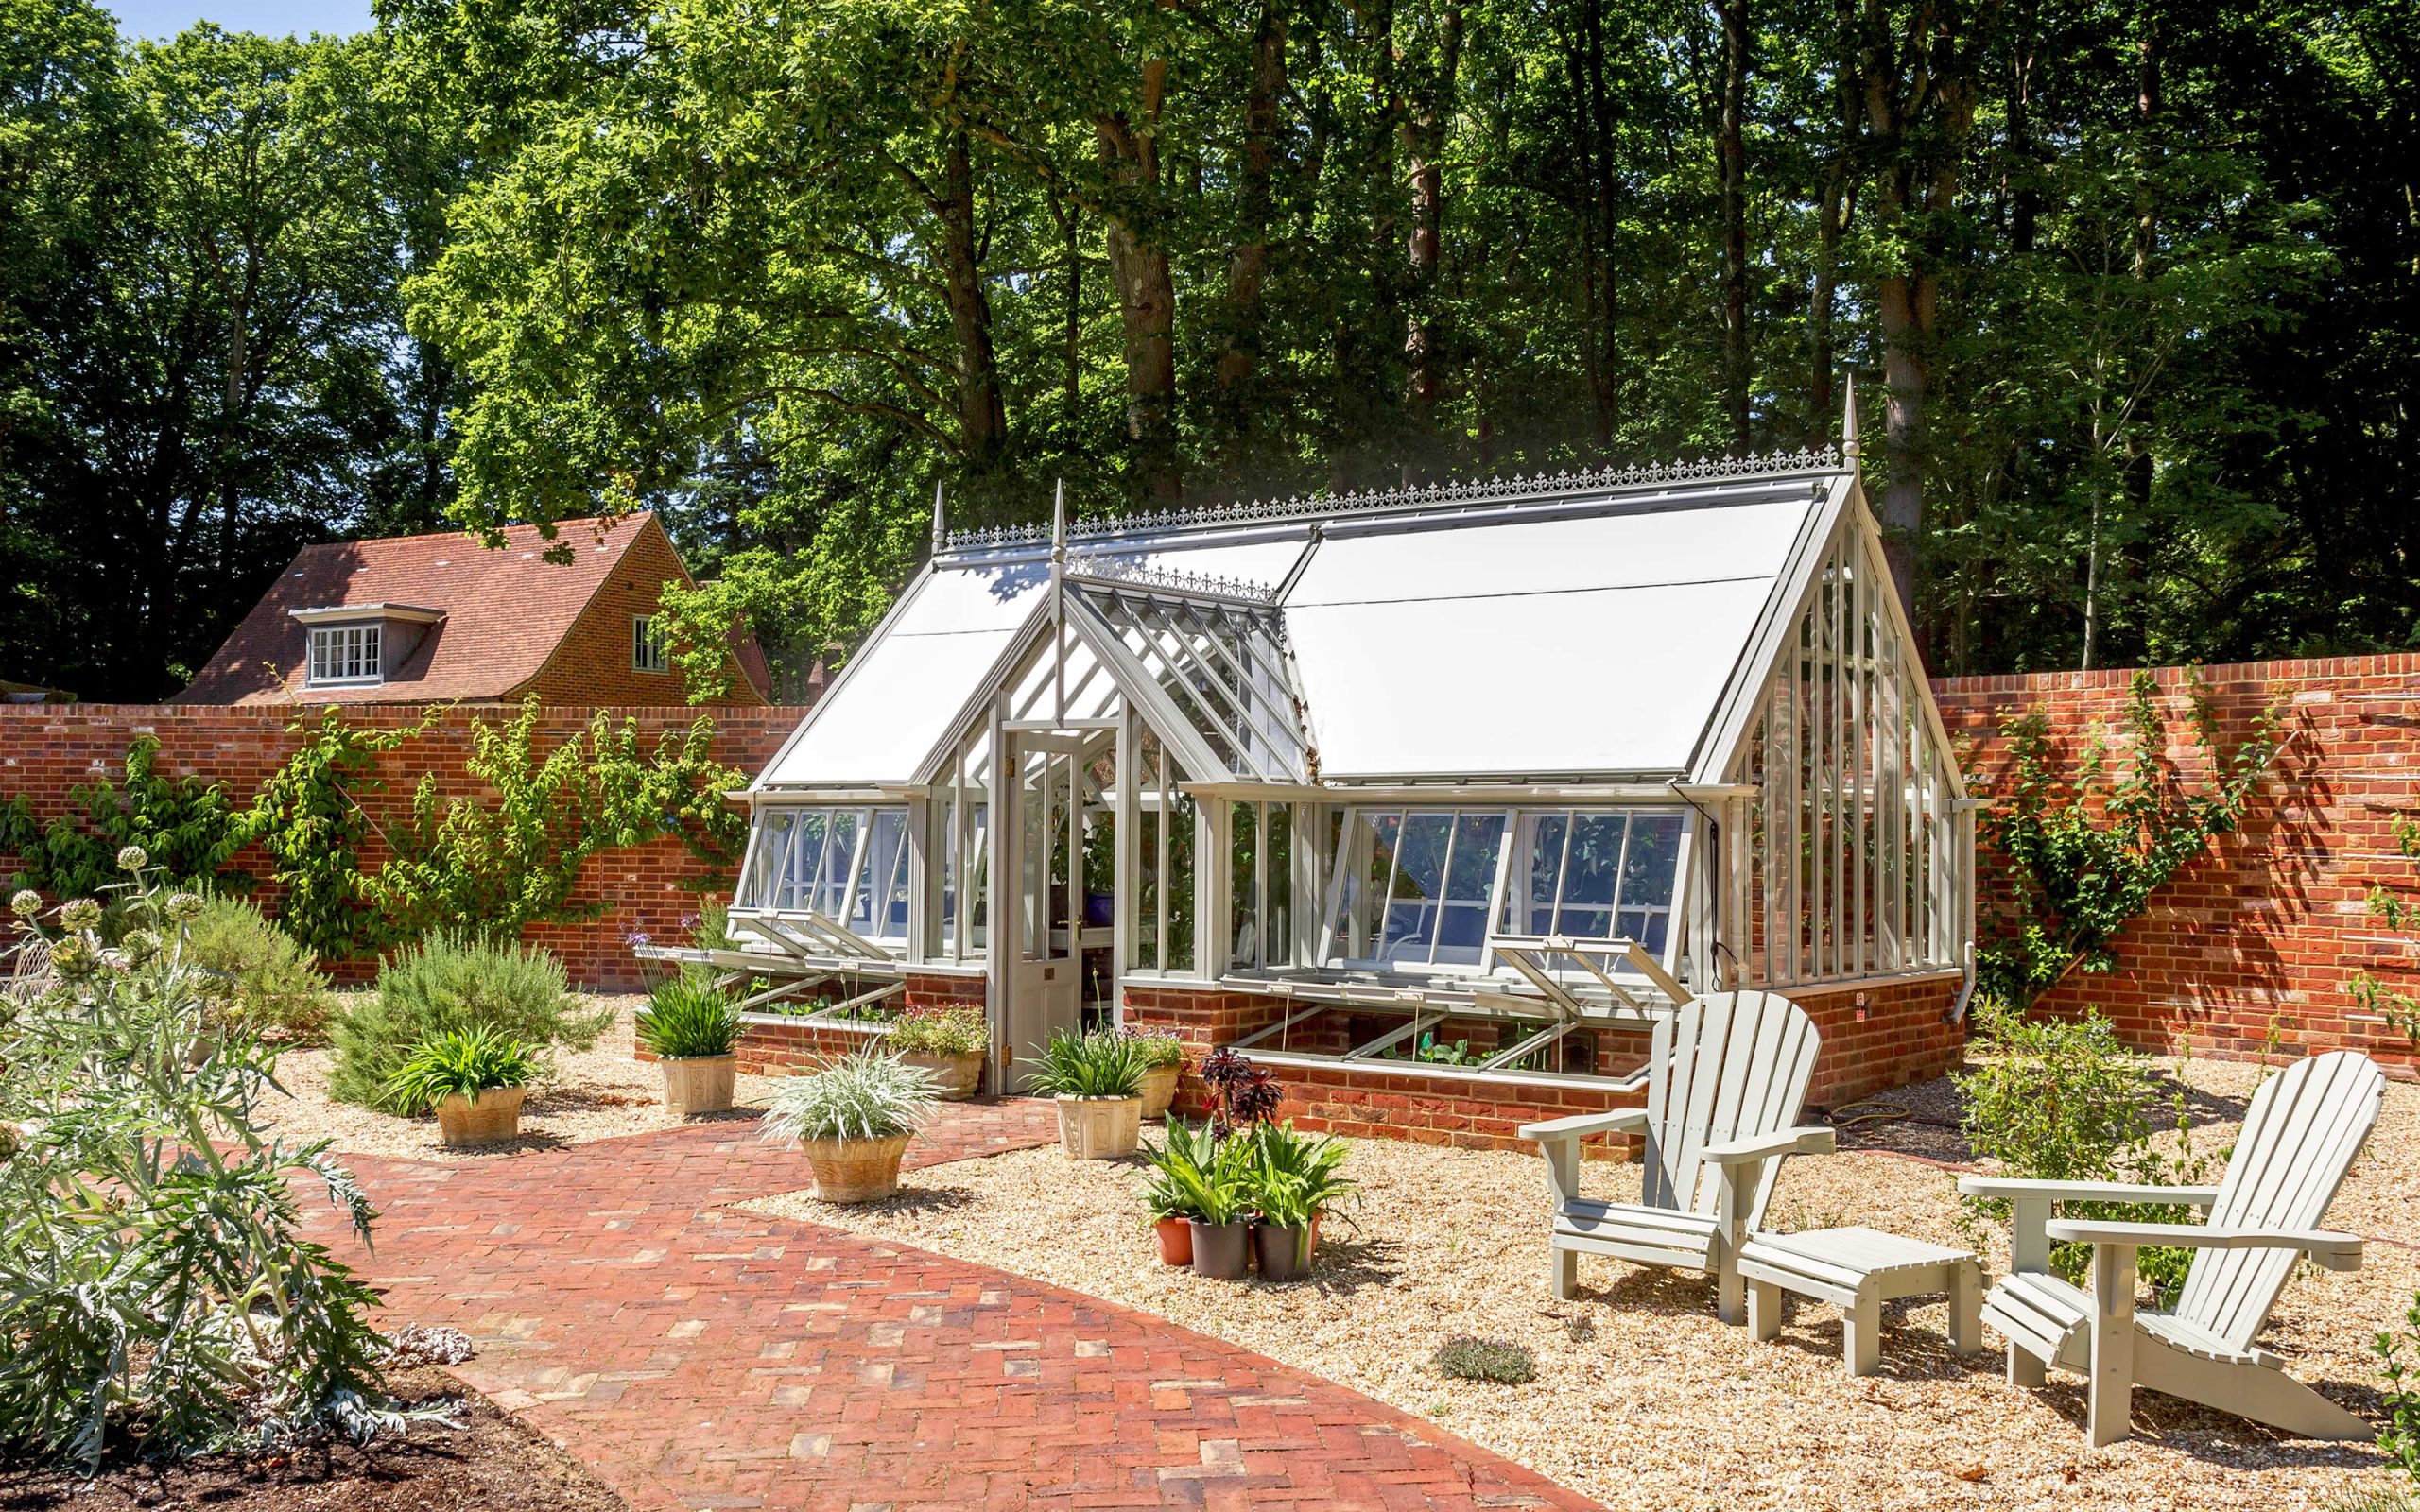 Hampshire Petersfield walled garden Alitex glass house country estate design